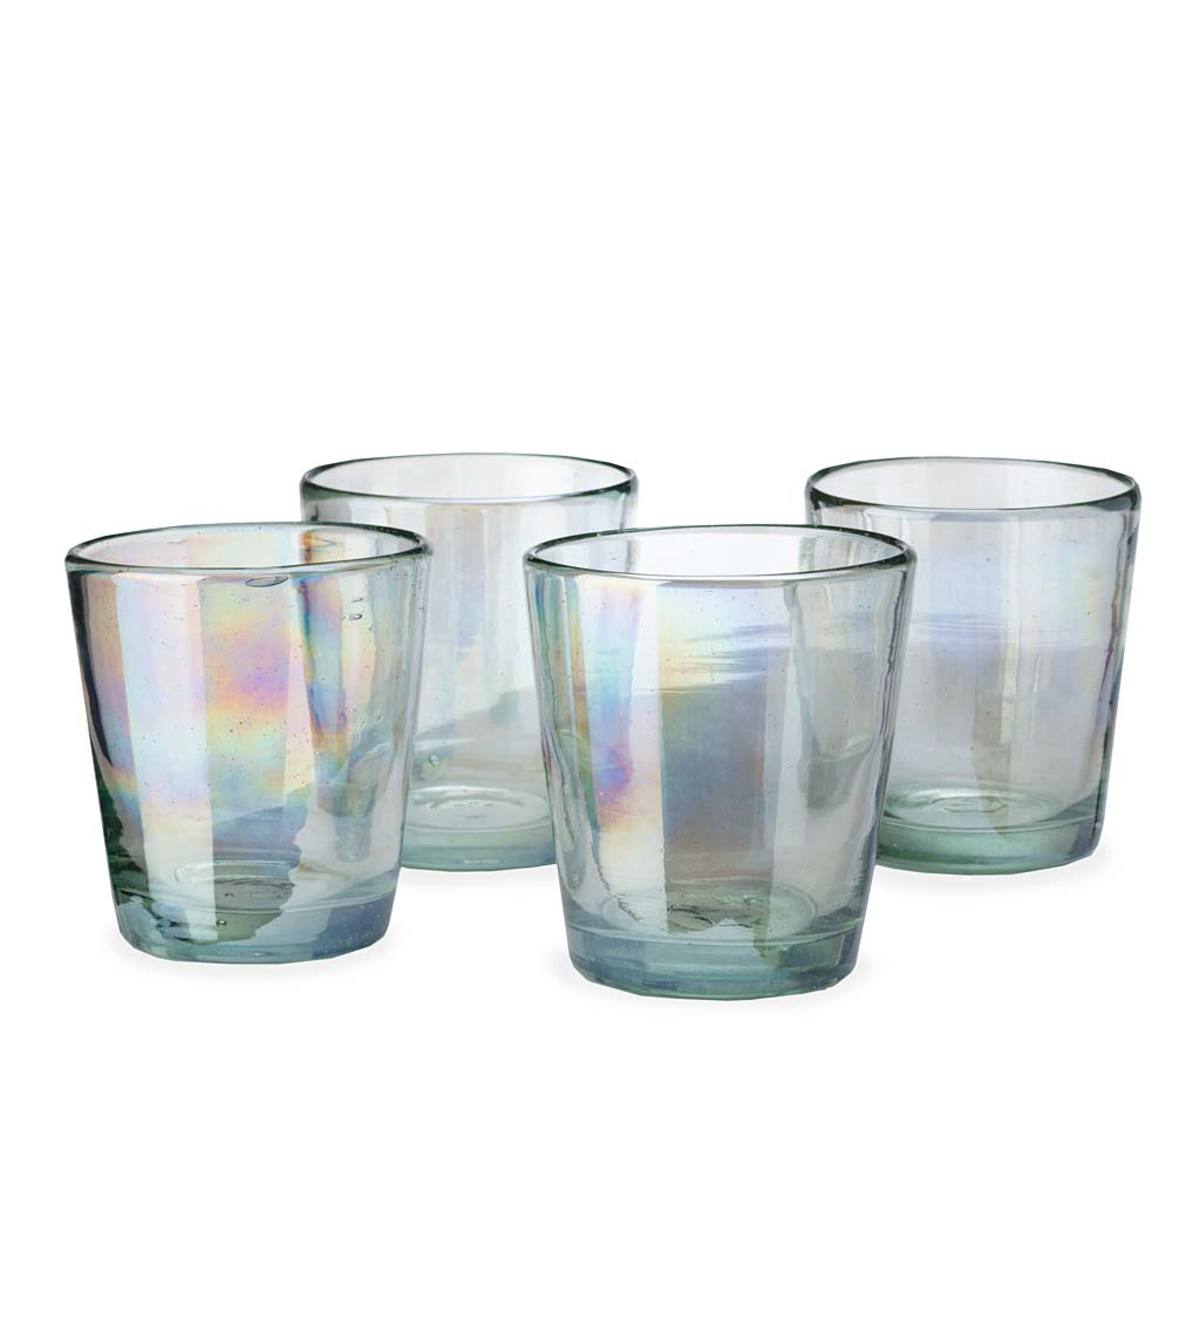 Cool drinking glasses, Prismatic drinking glasses that I fo…